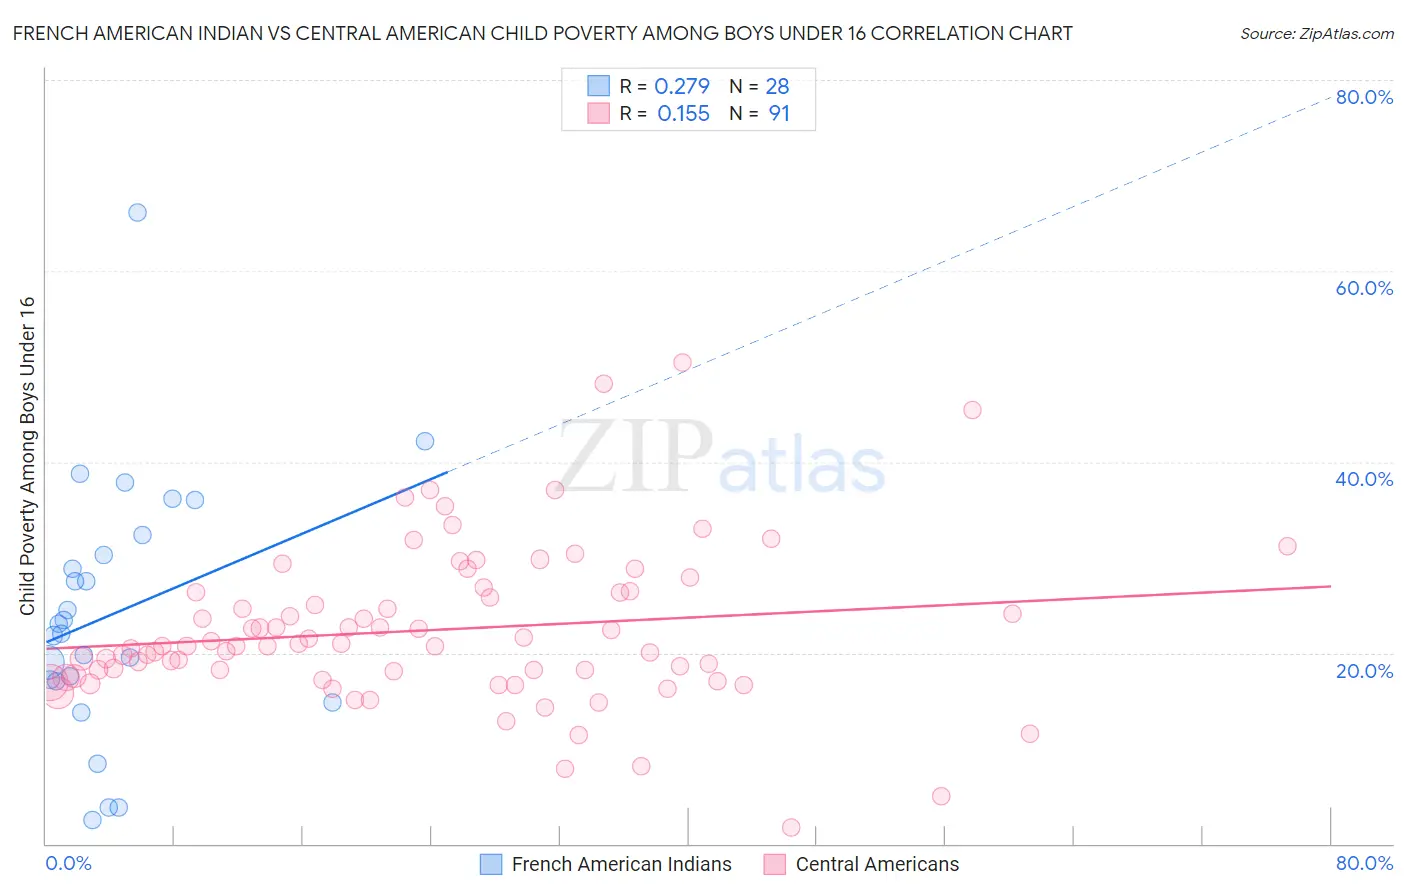 French American Indian vs Central American Child Poverty Among Boys Under 16